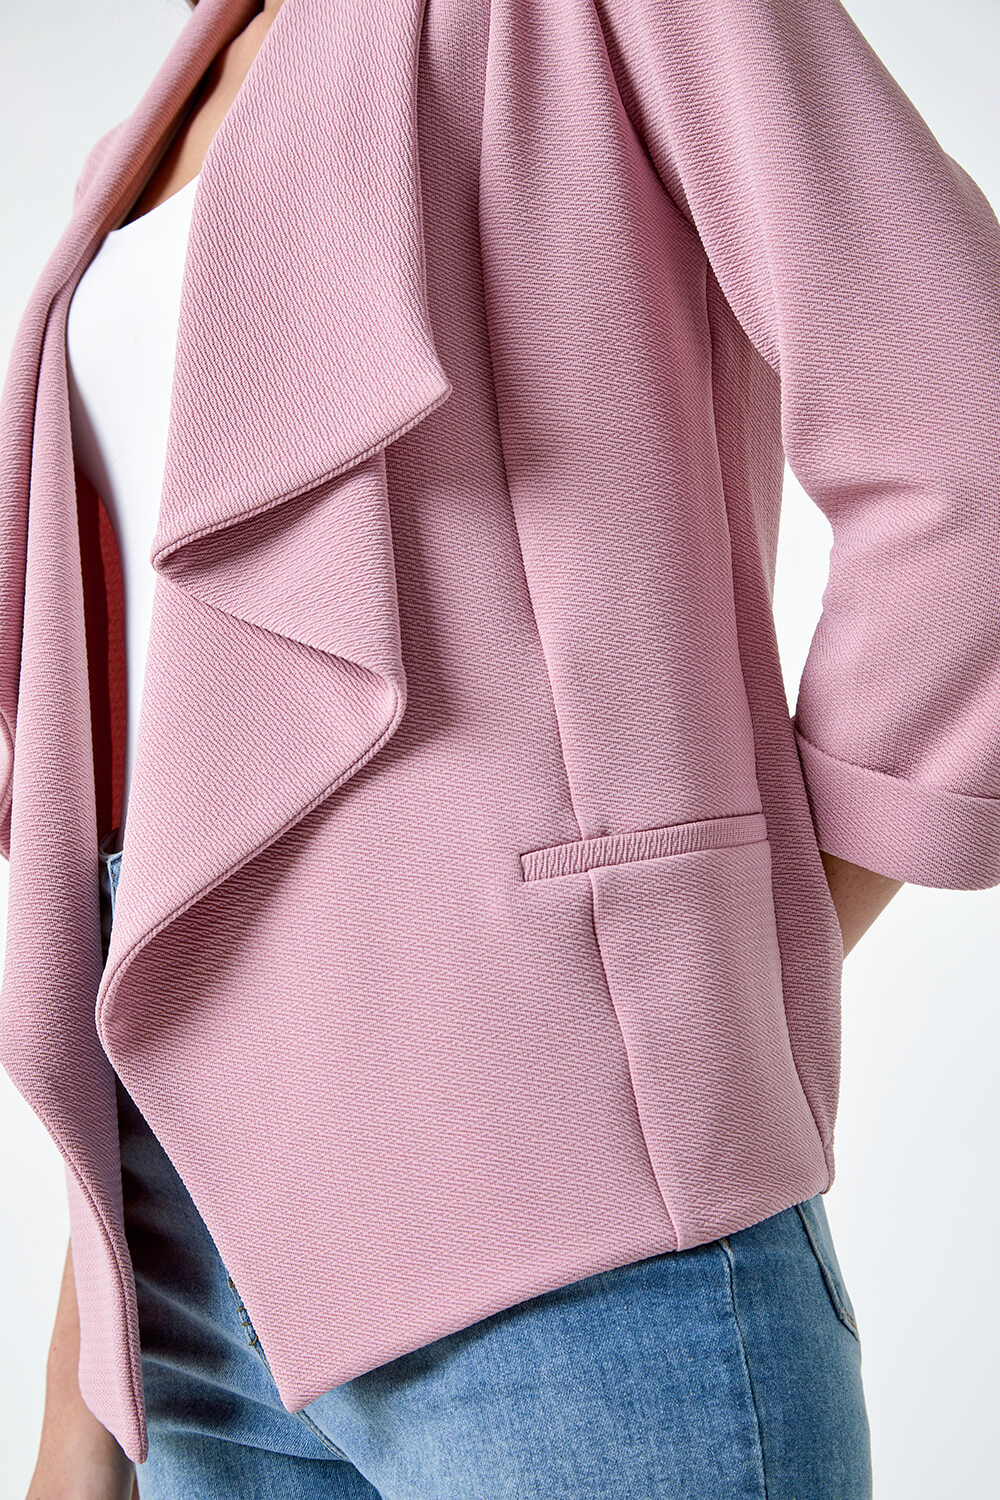 Rose Textured Stretch Waterfall Front Jacket, Image 5 of 5